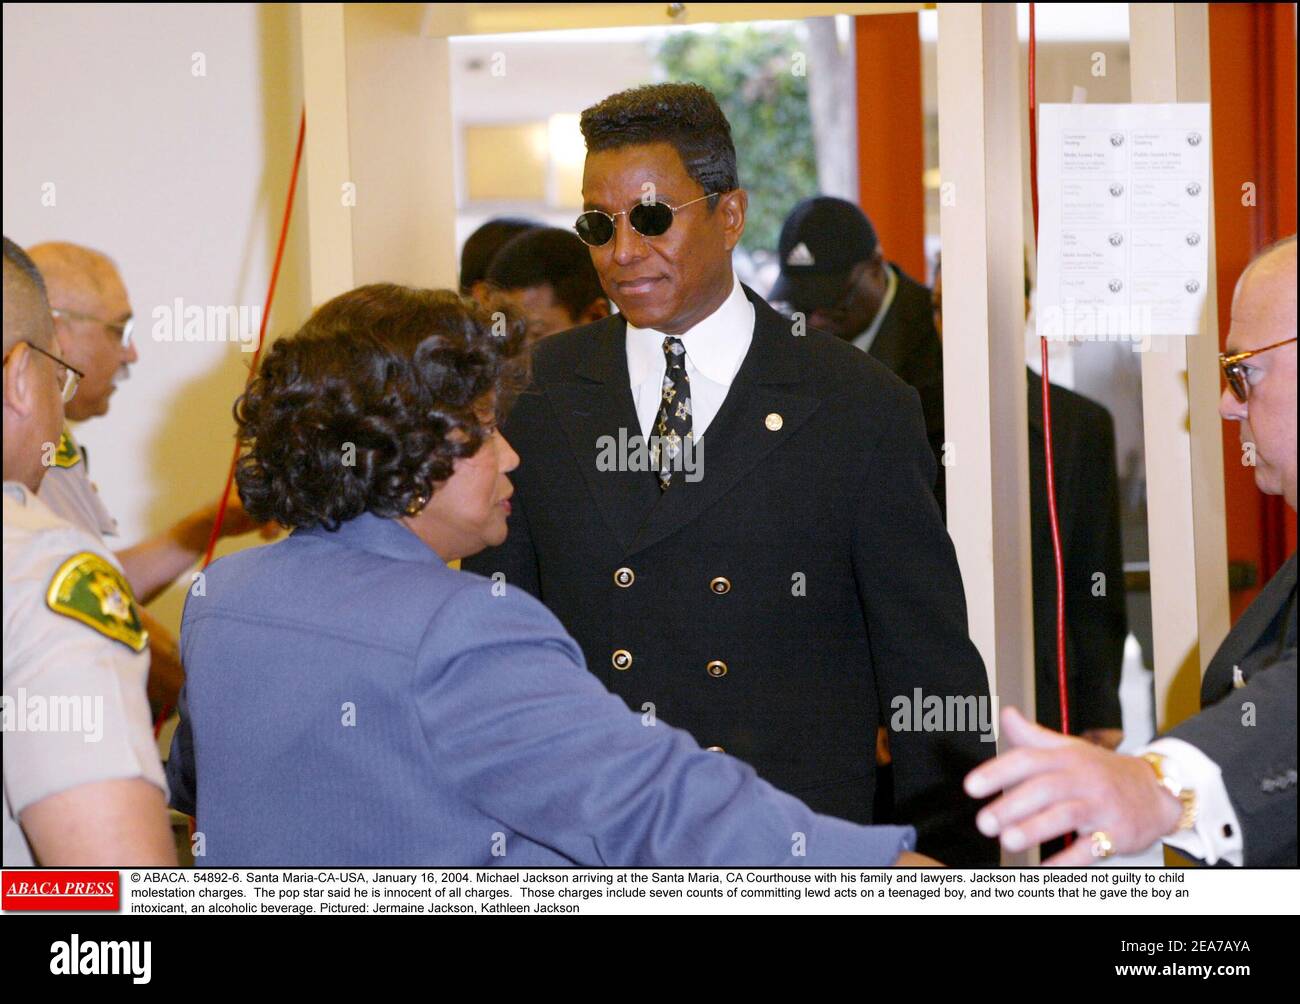 © ABACA. 54892-6. Santa Maria-CA-USA, January 16, 2004. Michael Jackson arriving at the Santa Maria, CA Courthouse with his family and lawyers. Jackson has pleaded not guilty to child molestation charges. The pop star said he is innocent of all charges. Those charges include seven counts of committing lewd acts on a teenaged boy, and two counts that he gave the boy an intoxicant, an alcoholic beverage. Pictured: Jermaine Jackson, Katherine Jackson Stock Photo